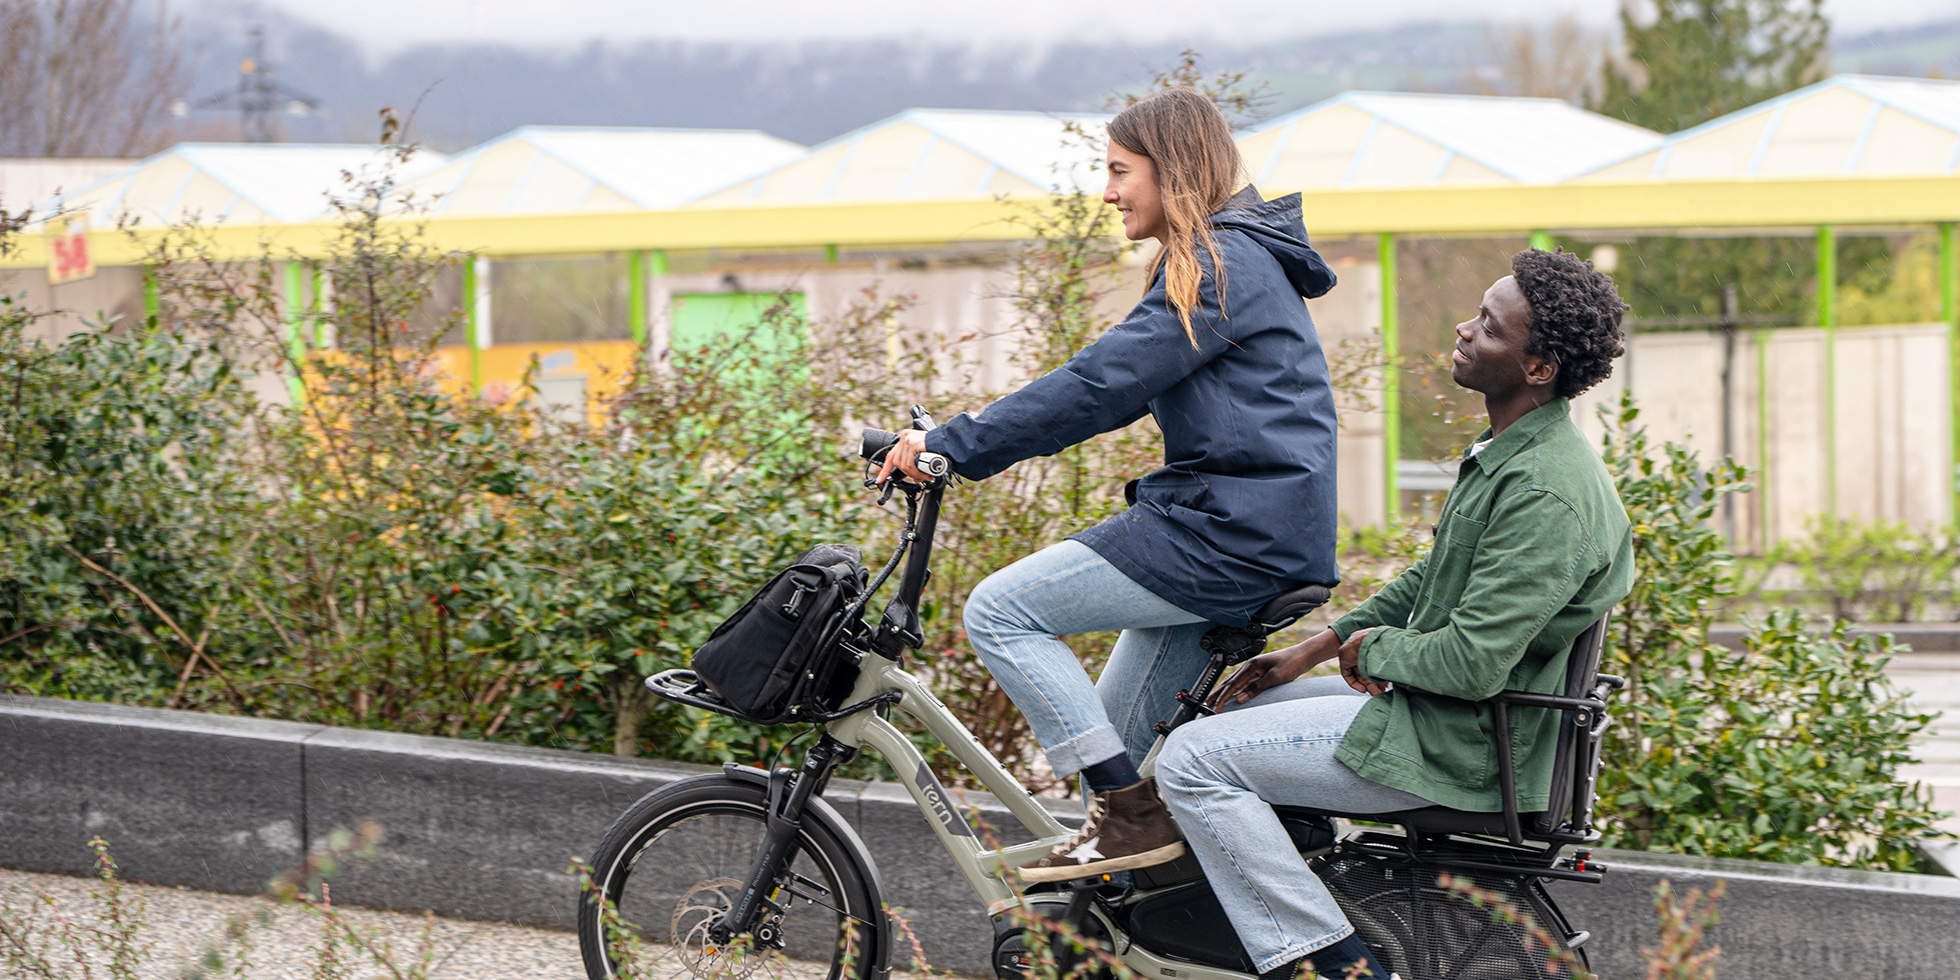 tern hsd: The compact e-cargo bike that fits adult passenger